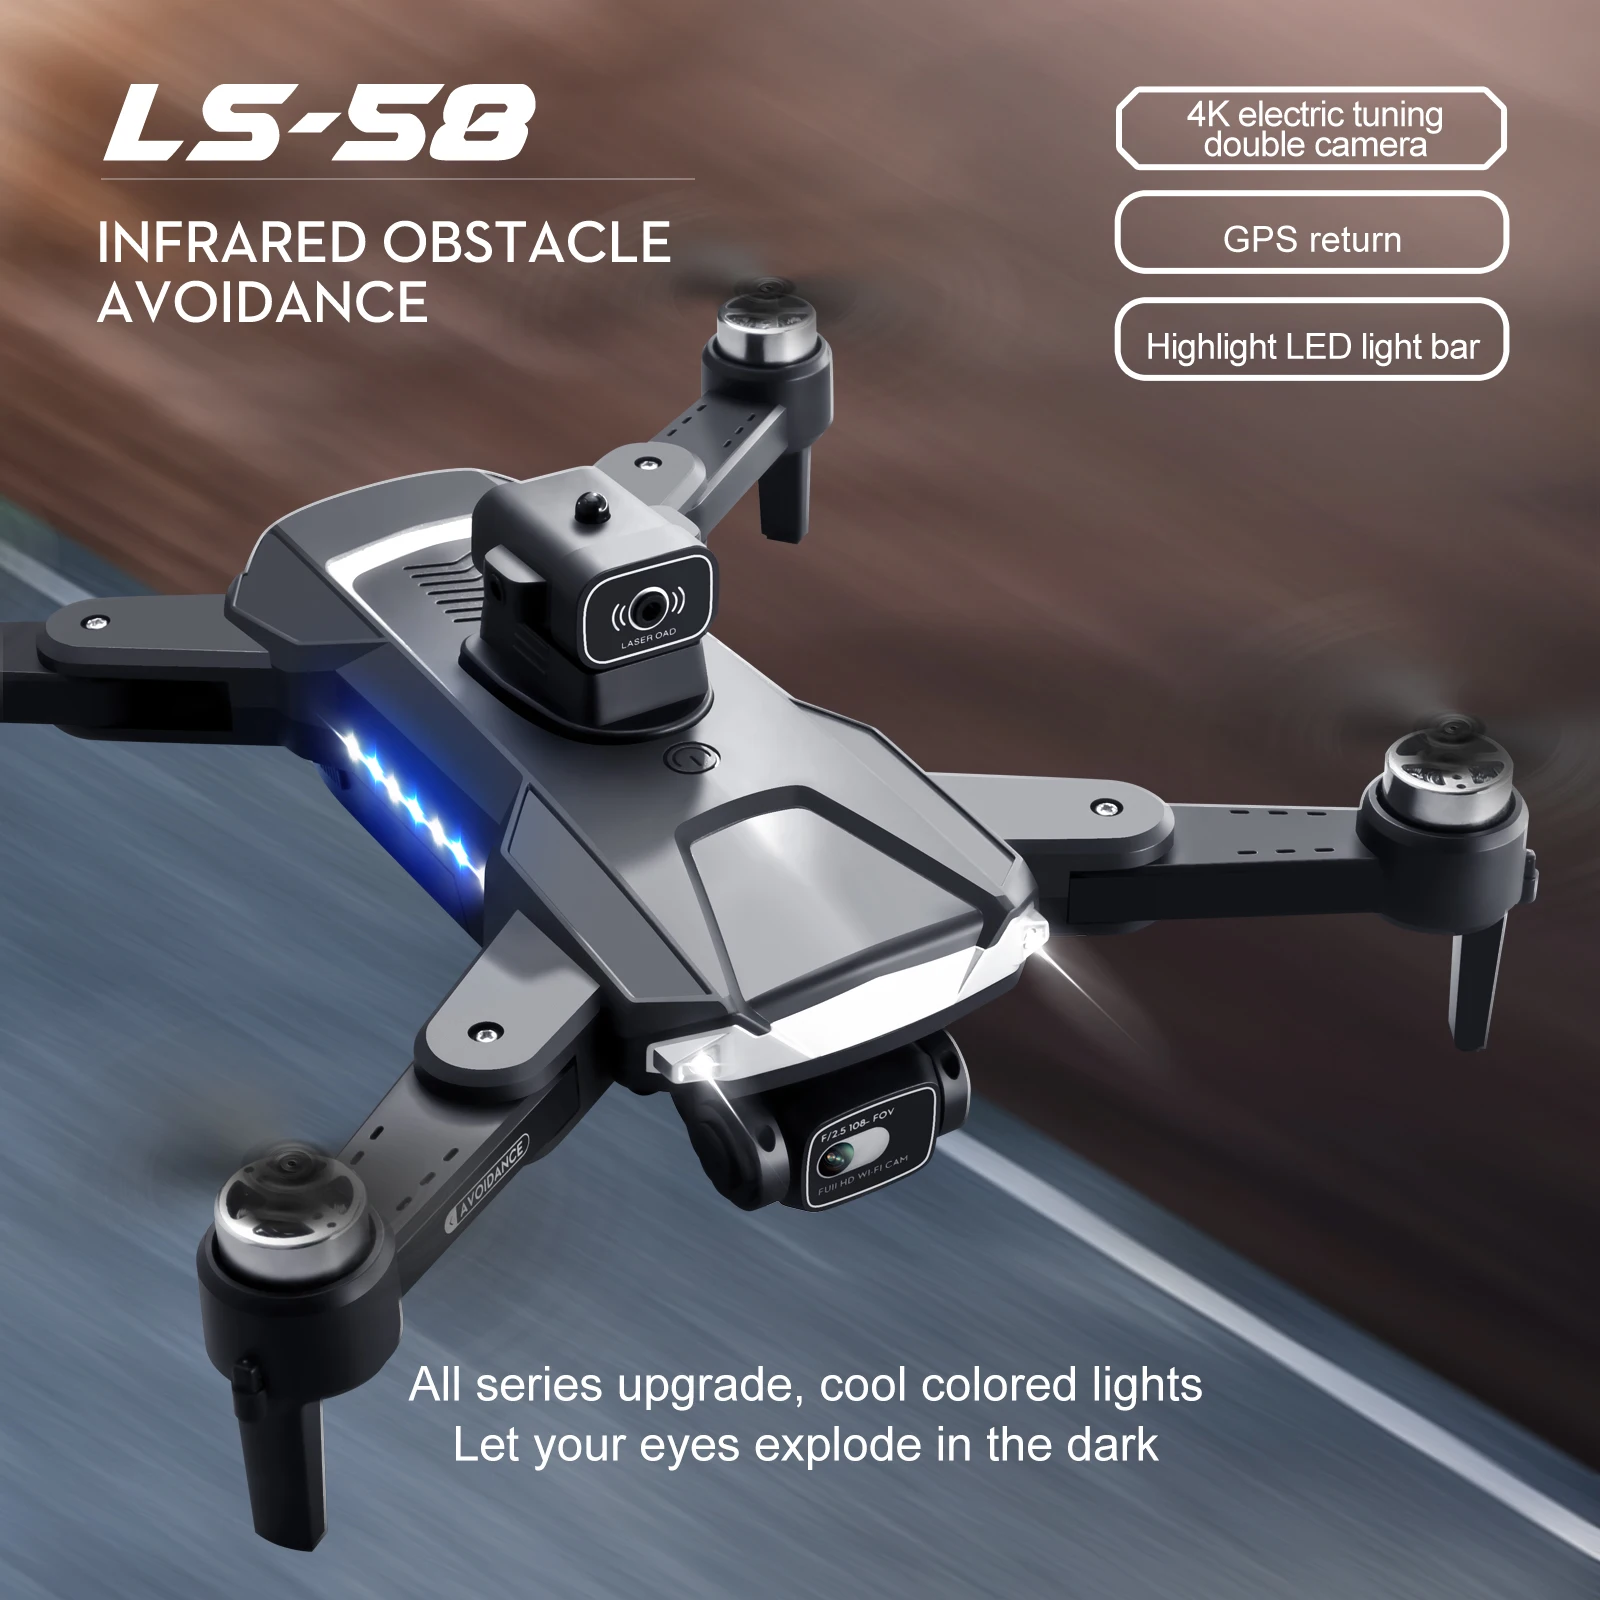 KBDFA LS58 Drone, ls-5d 4k electric tuning double camera infrare